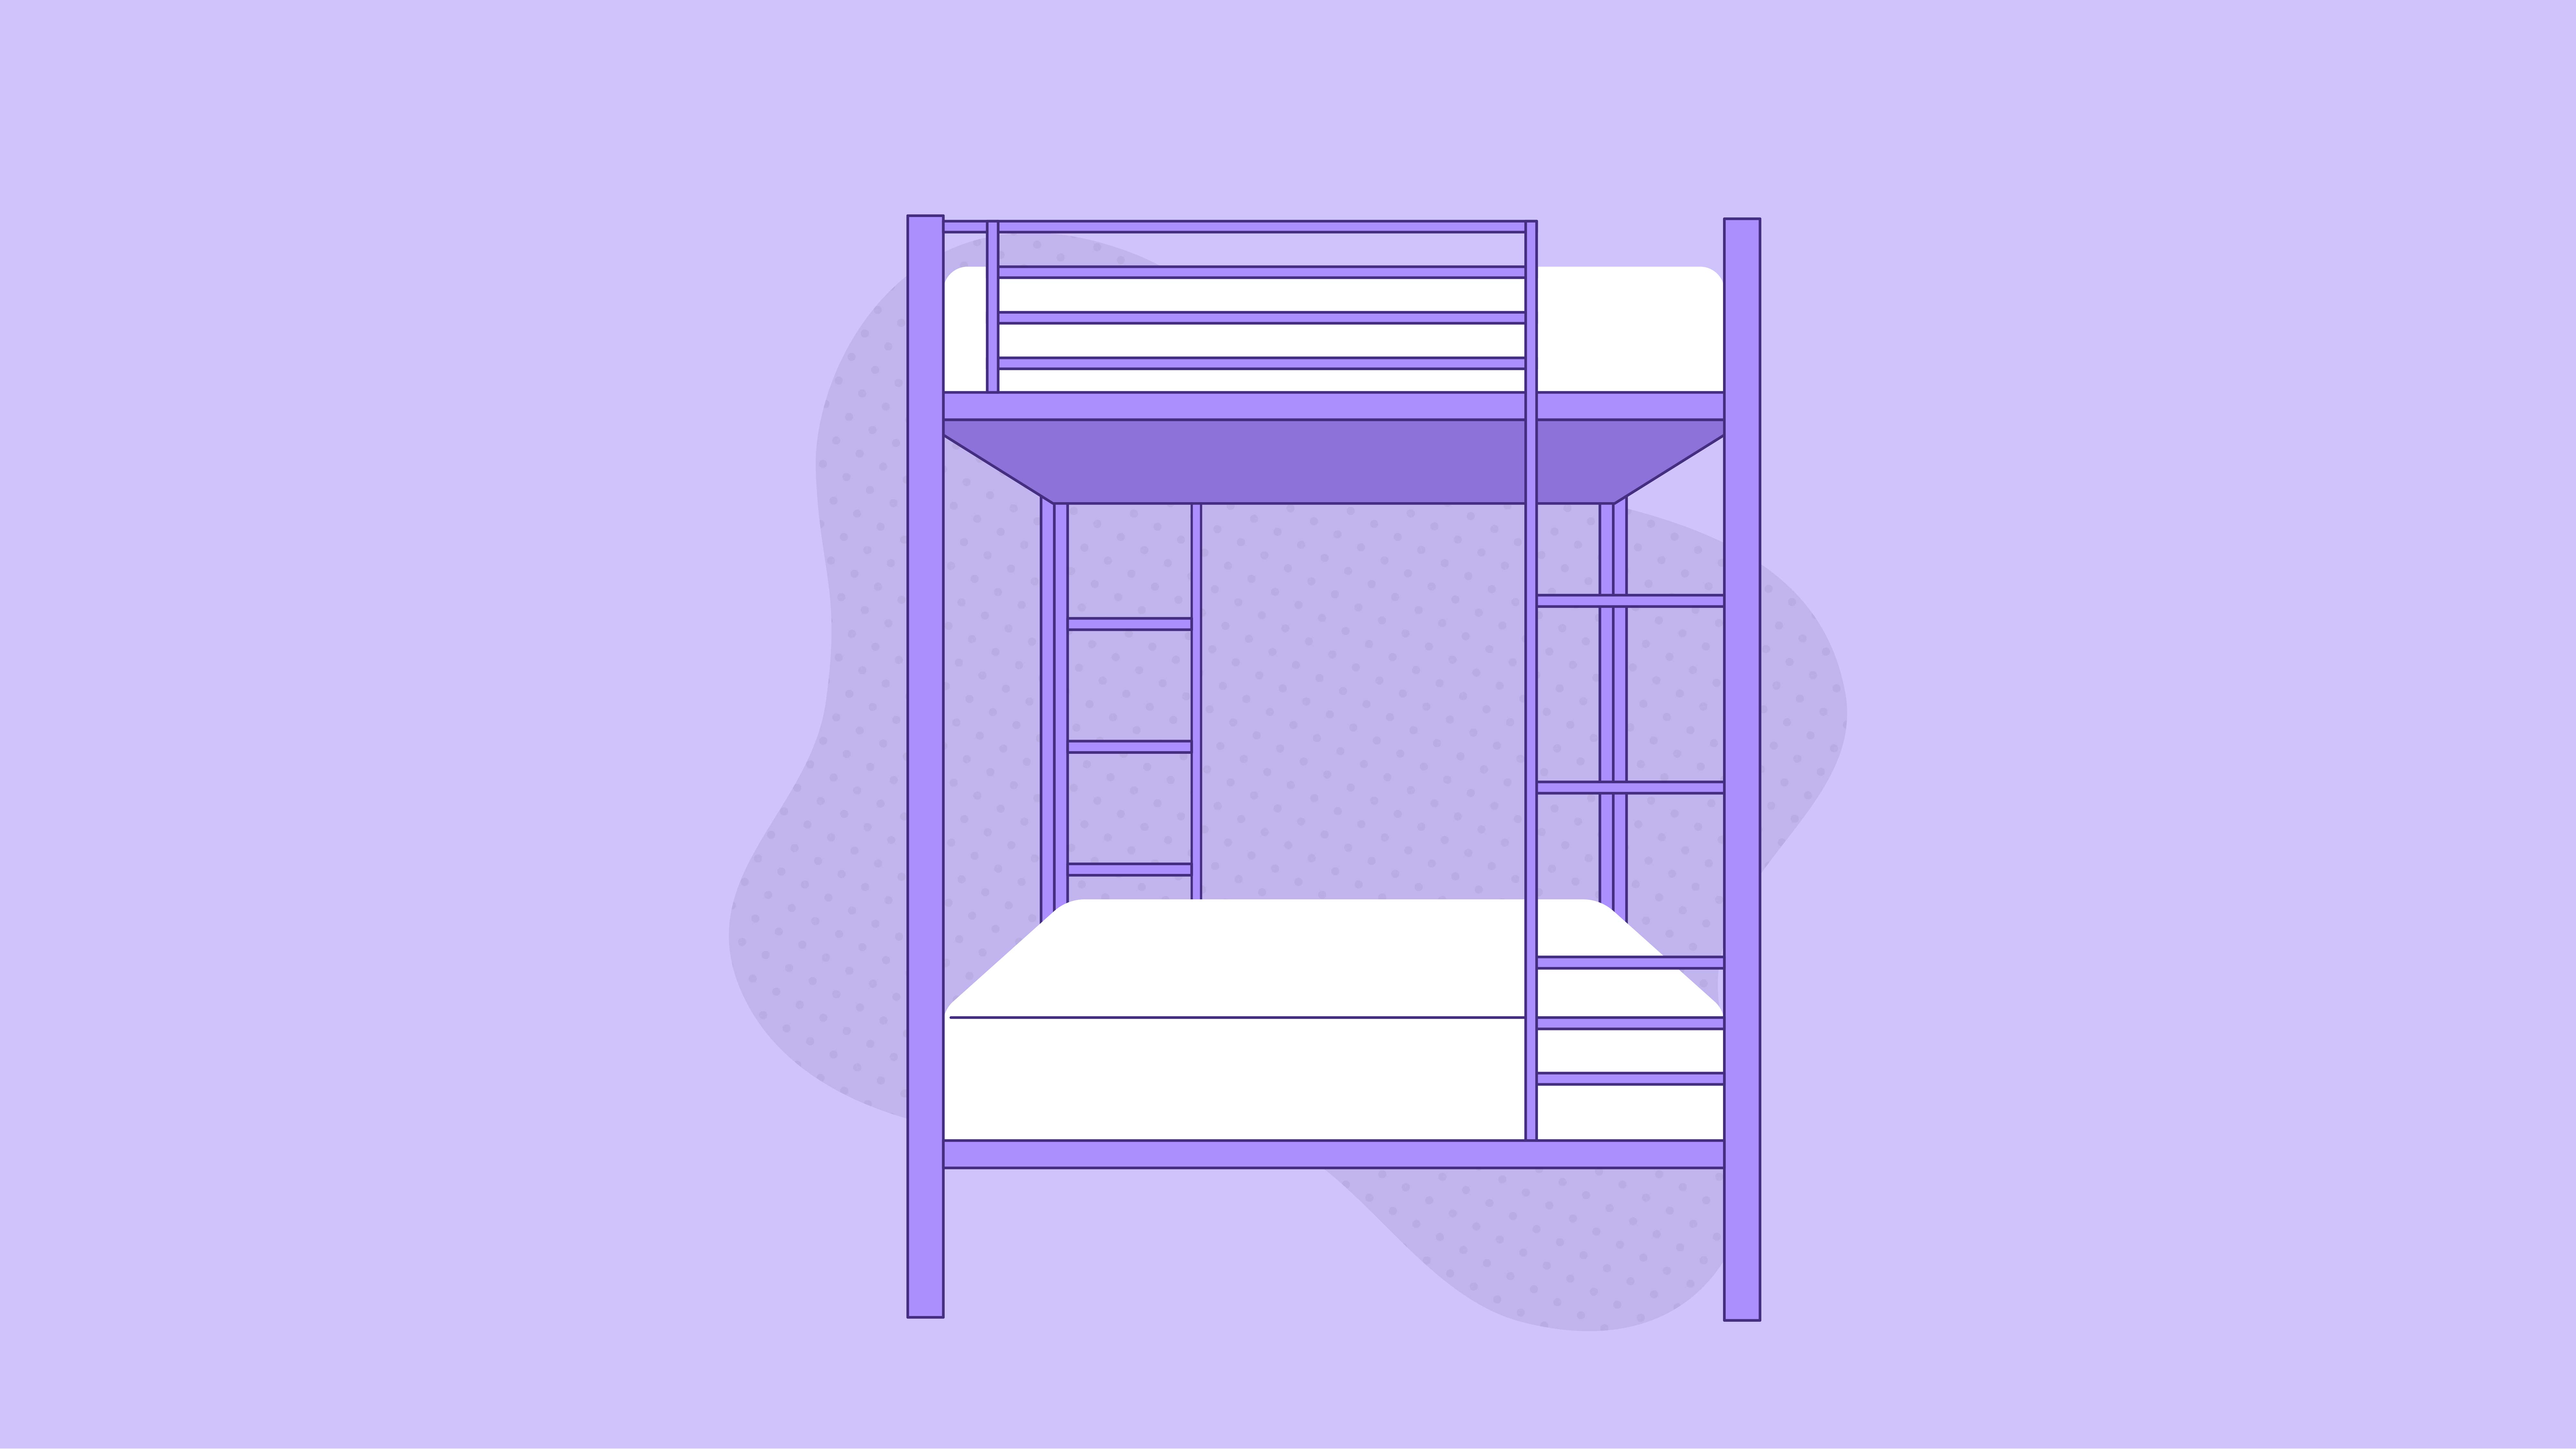 Bunk Bed Dimensions And Sizes Guide, Bunk Bed Sheet Size